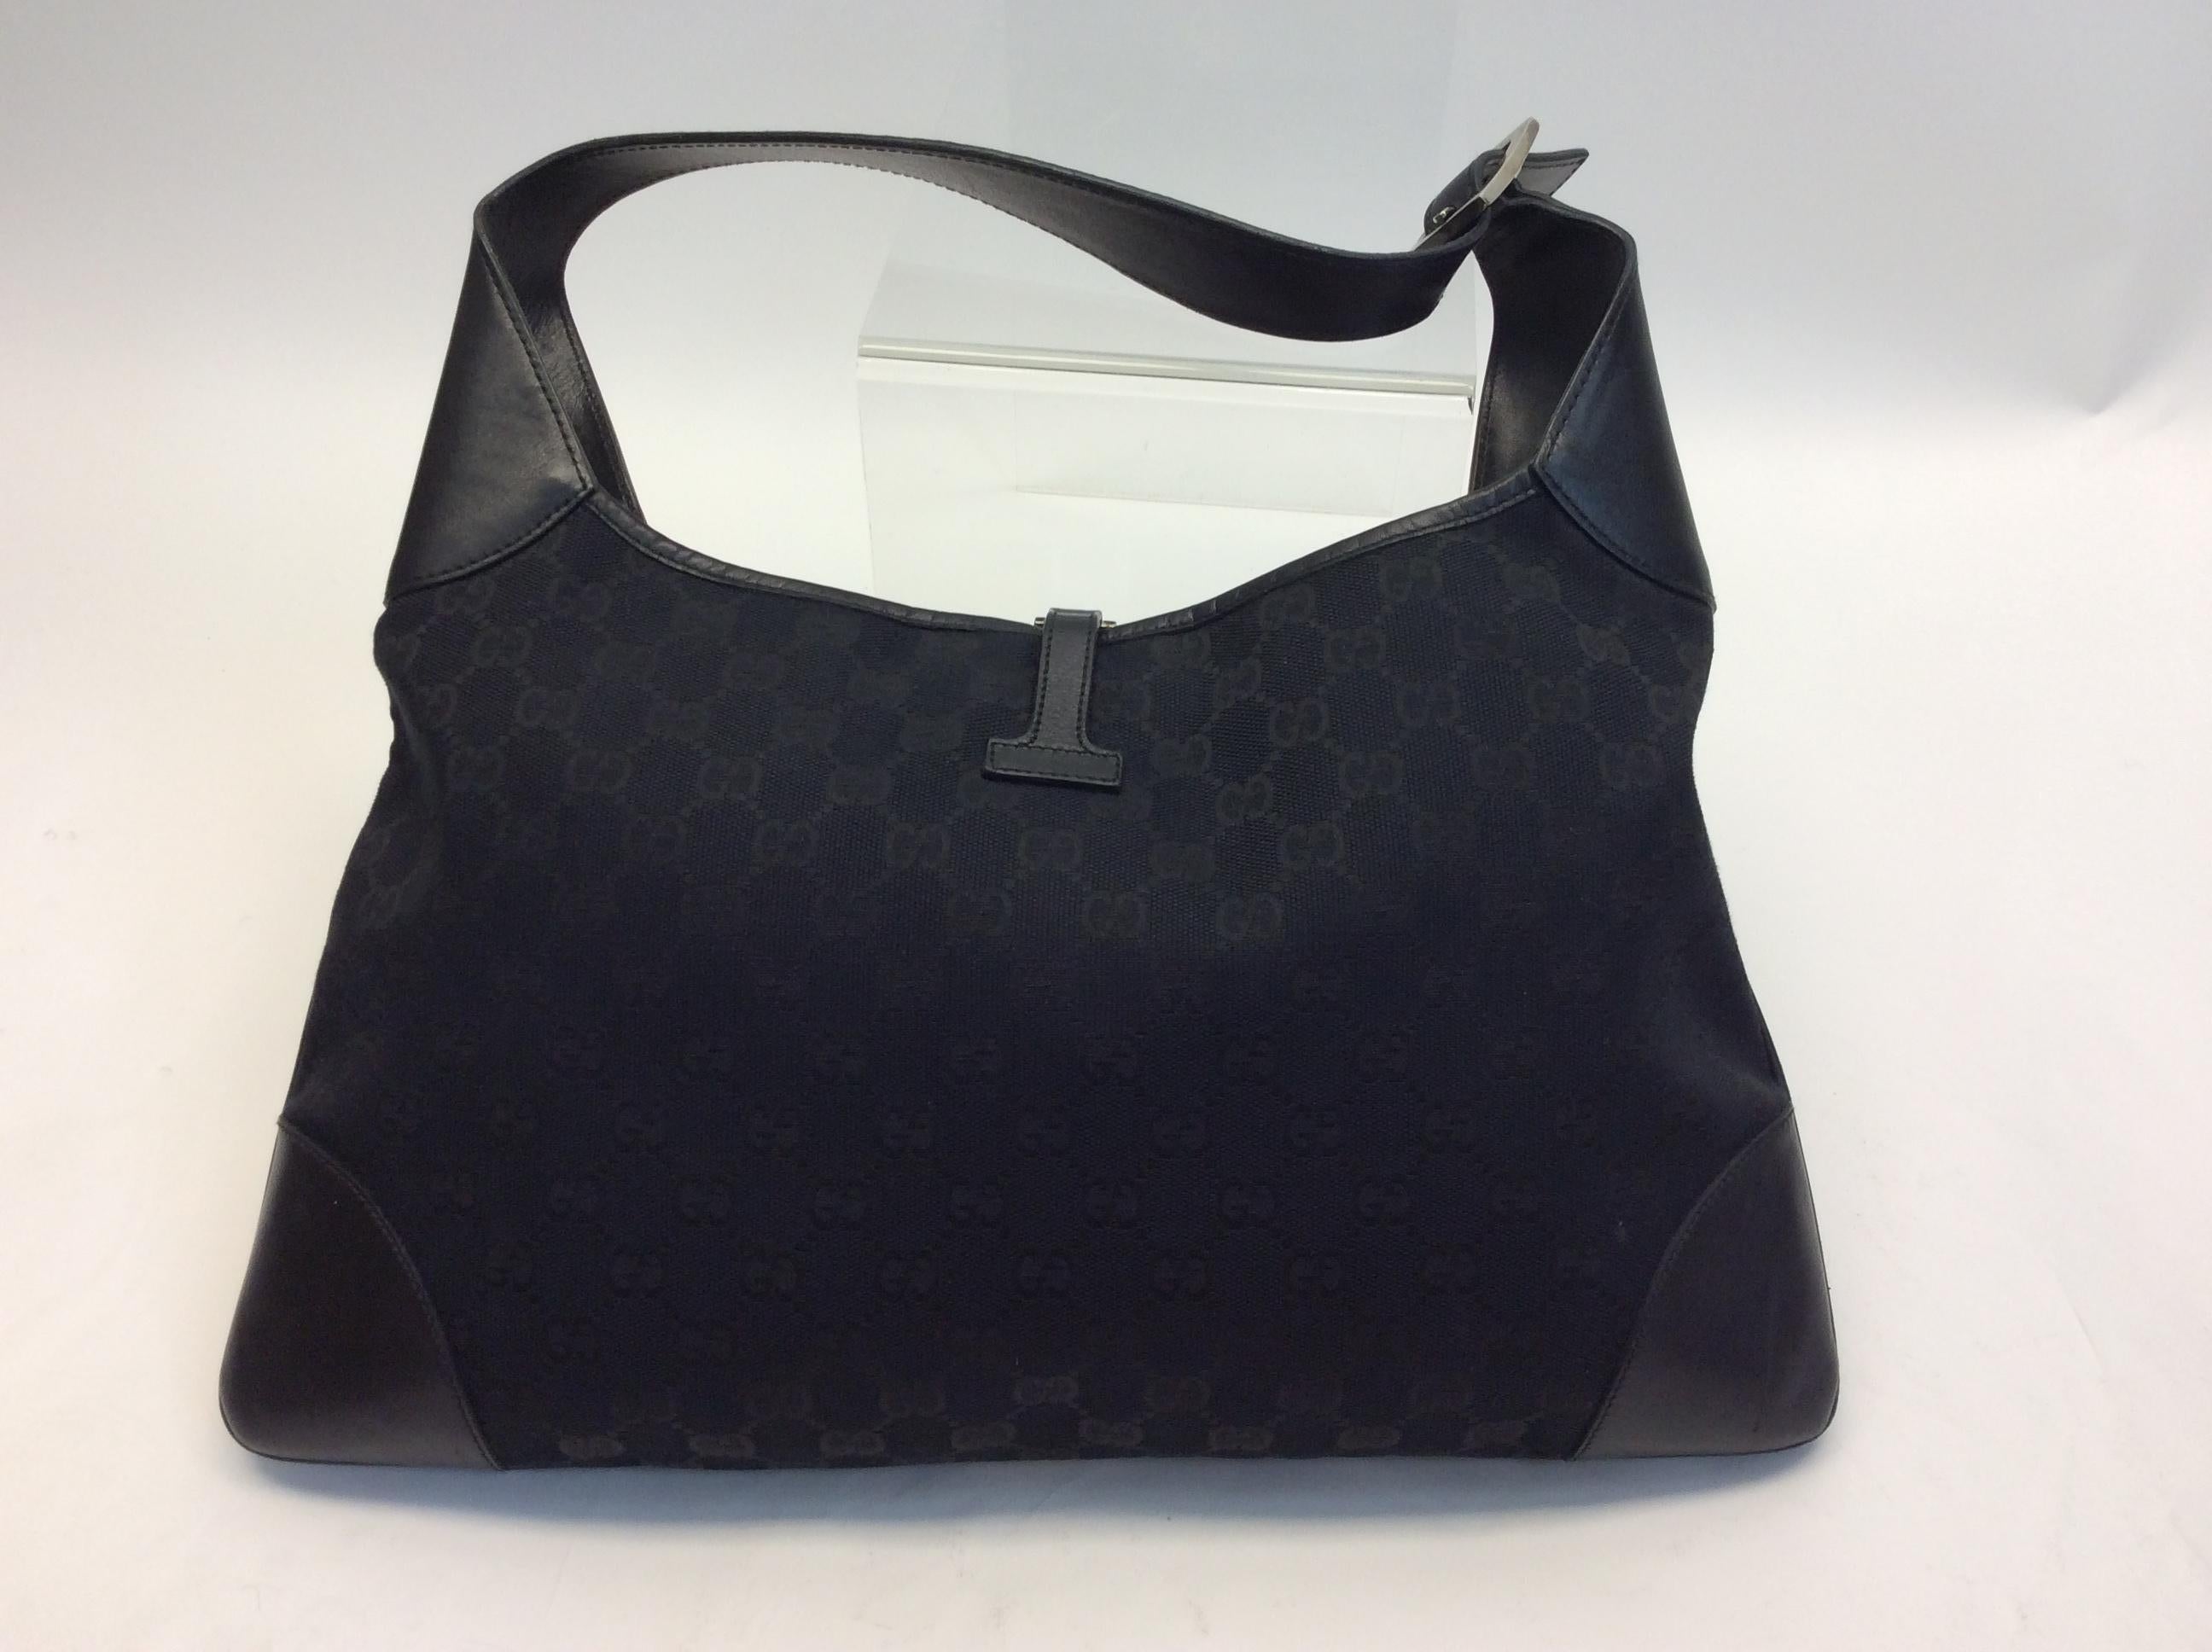 Gucci Black Fabric Stripe Shoulder Bag In Good Condition For Sale In Narberth, PA